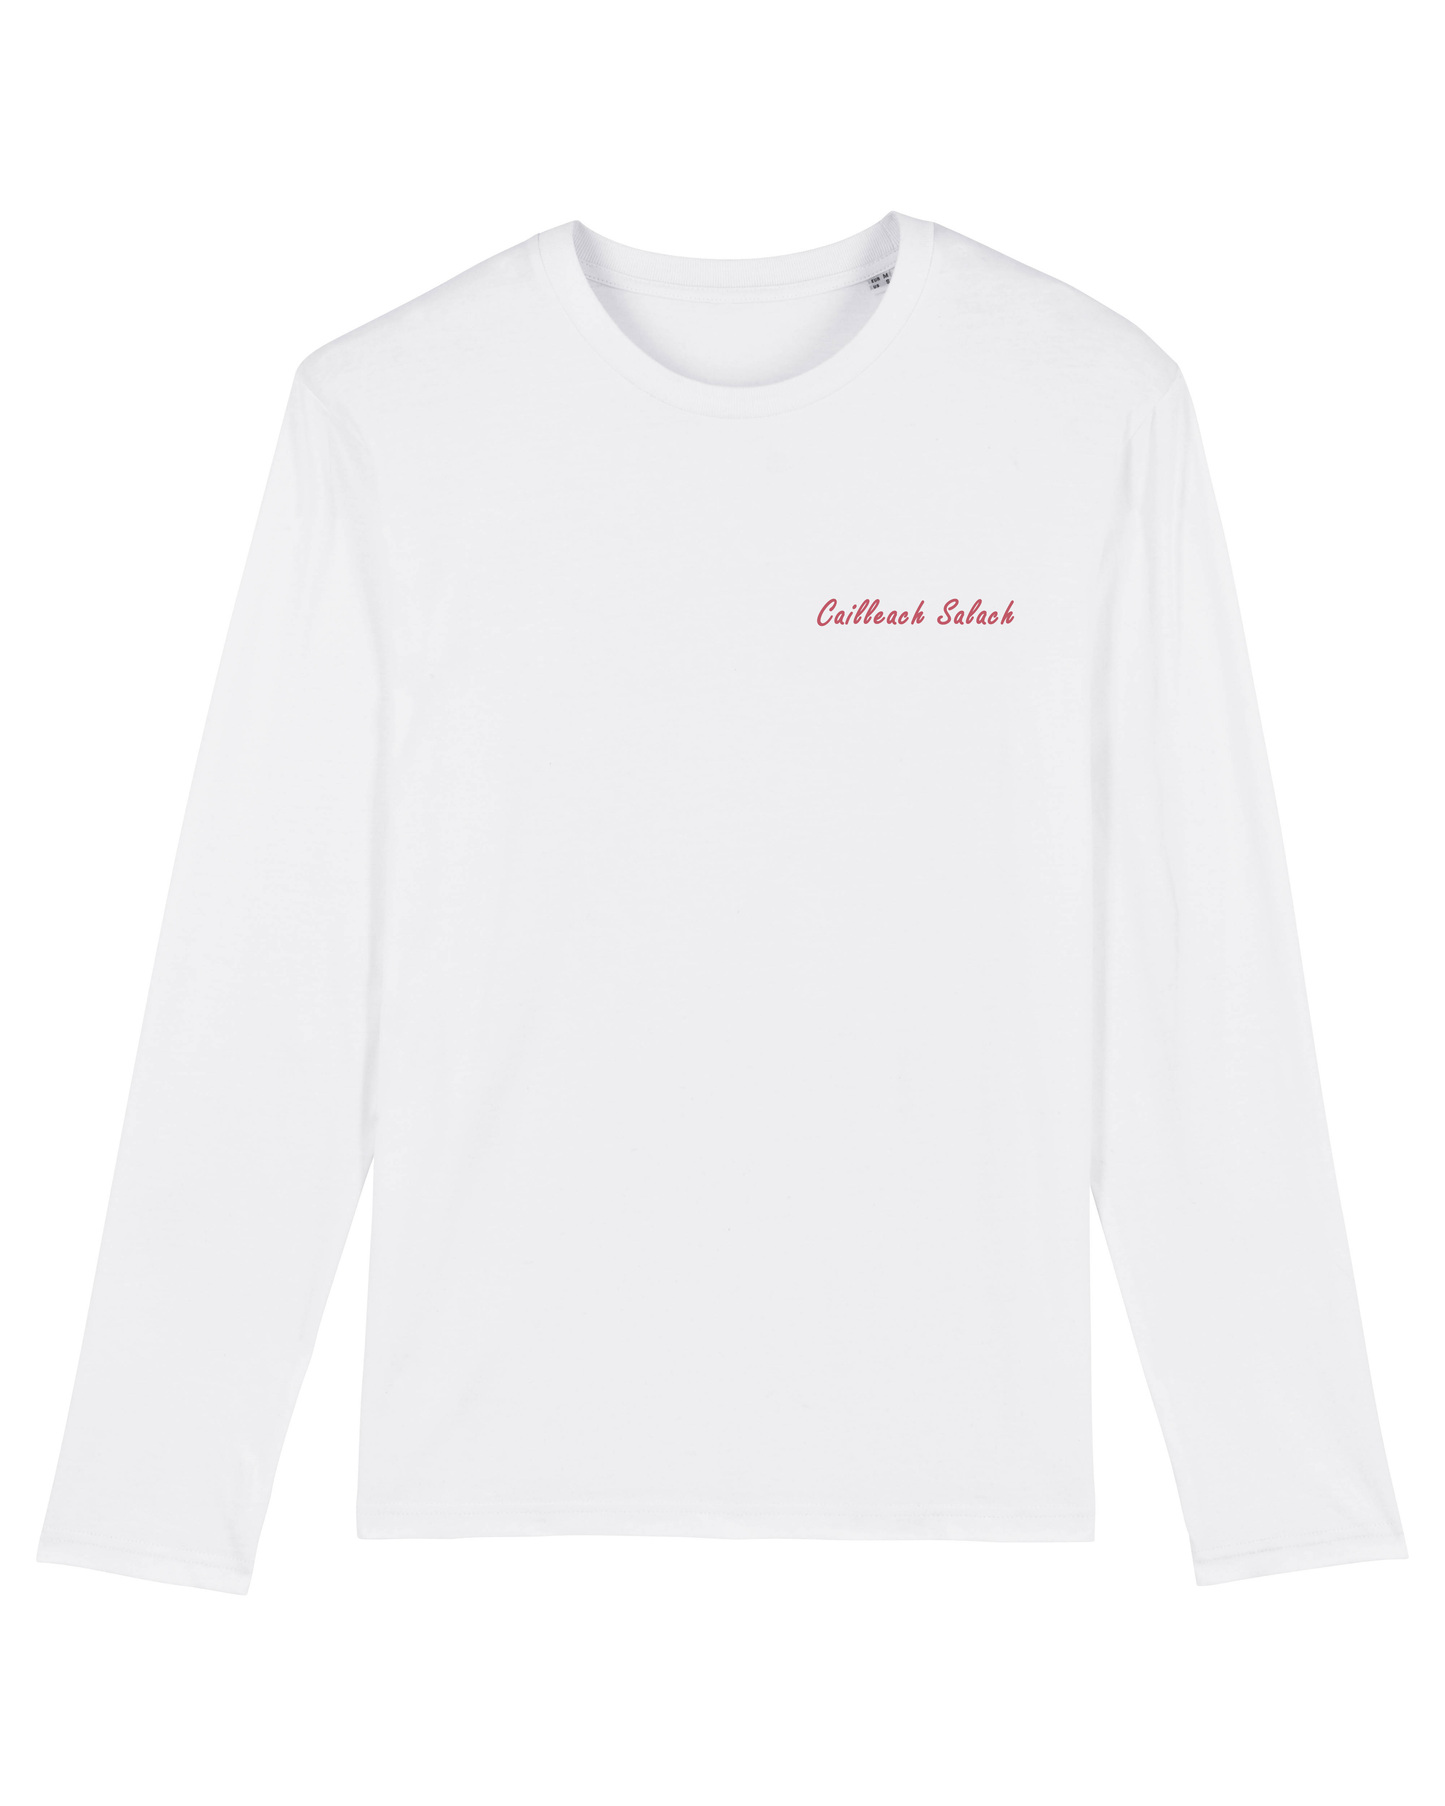 Cailleach Salach / Dirty Witch: Organic Cotton Long Sleeved Tee - Beanantees